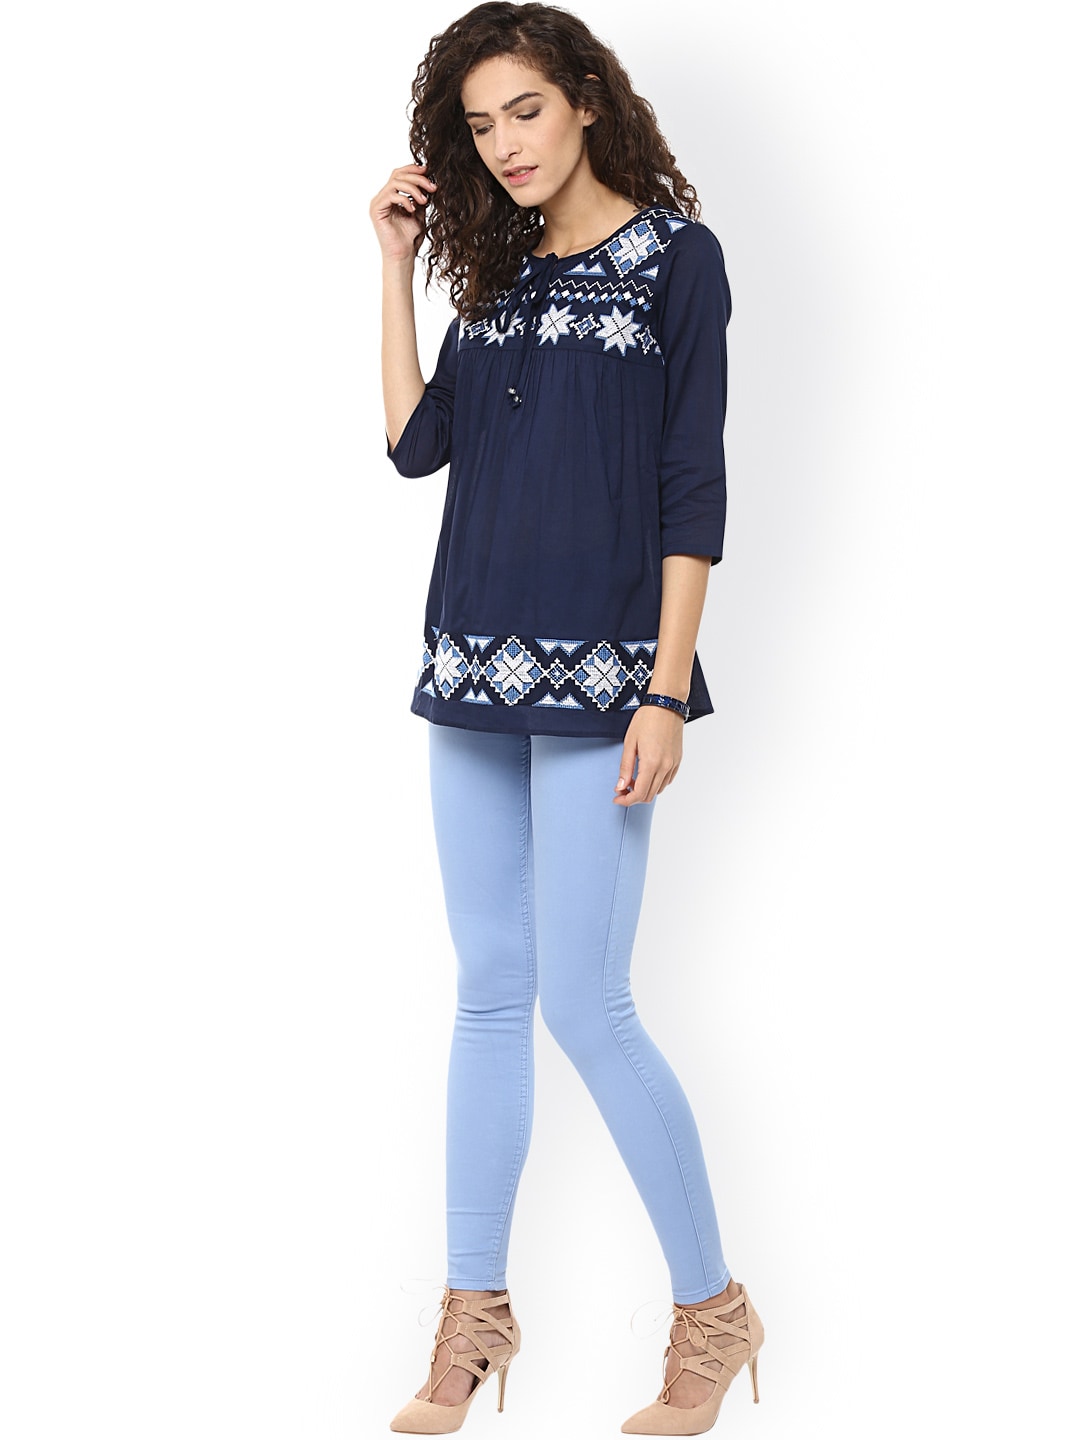 Designer Crep Top For Women Blue Top With White Star, 47% OFF